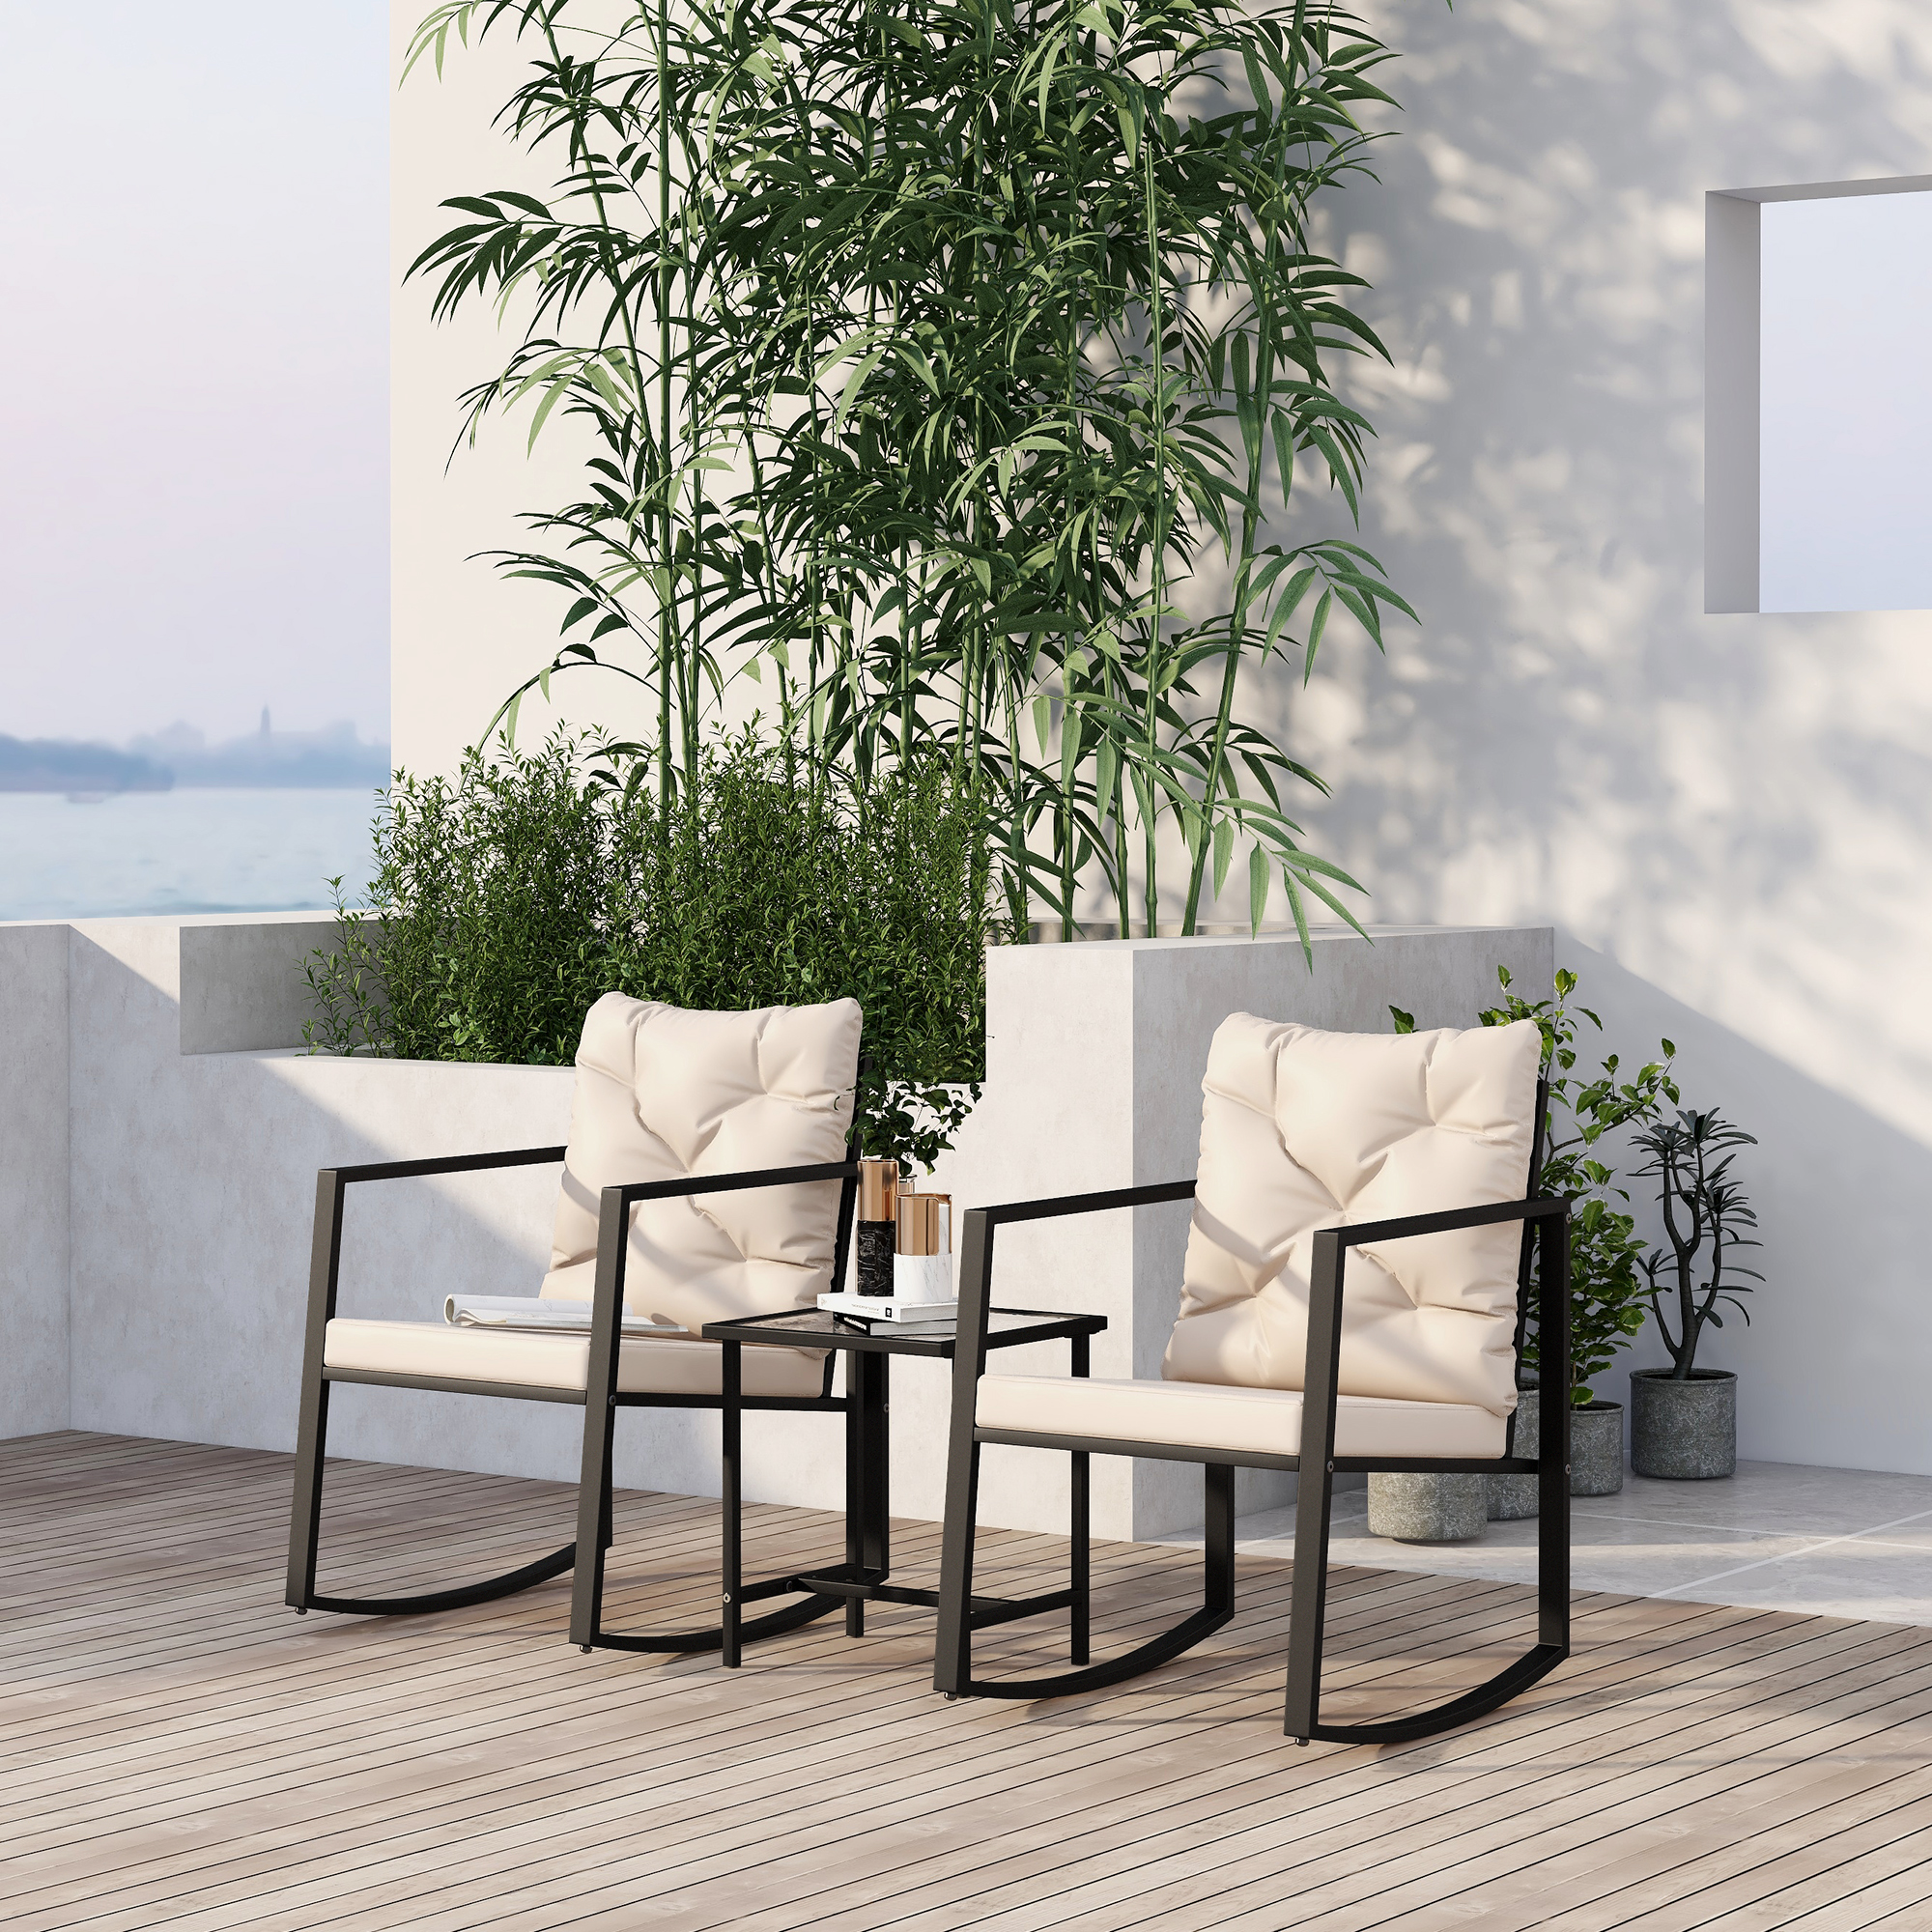 3 Piece Outdoor Furniture Set Luxury Comfort Lounge Chair Patio Modern Rocking Chair Furniture Set Clearance Upholstered Chair Conversation Set with Coffee Table for Patio and Bistro (Beige) - image 2 of 4